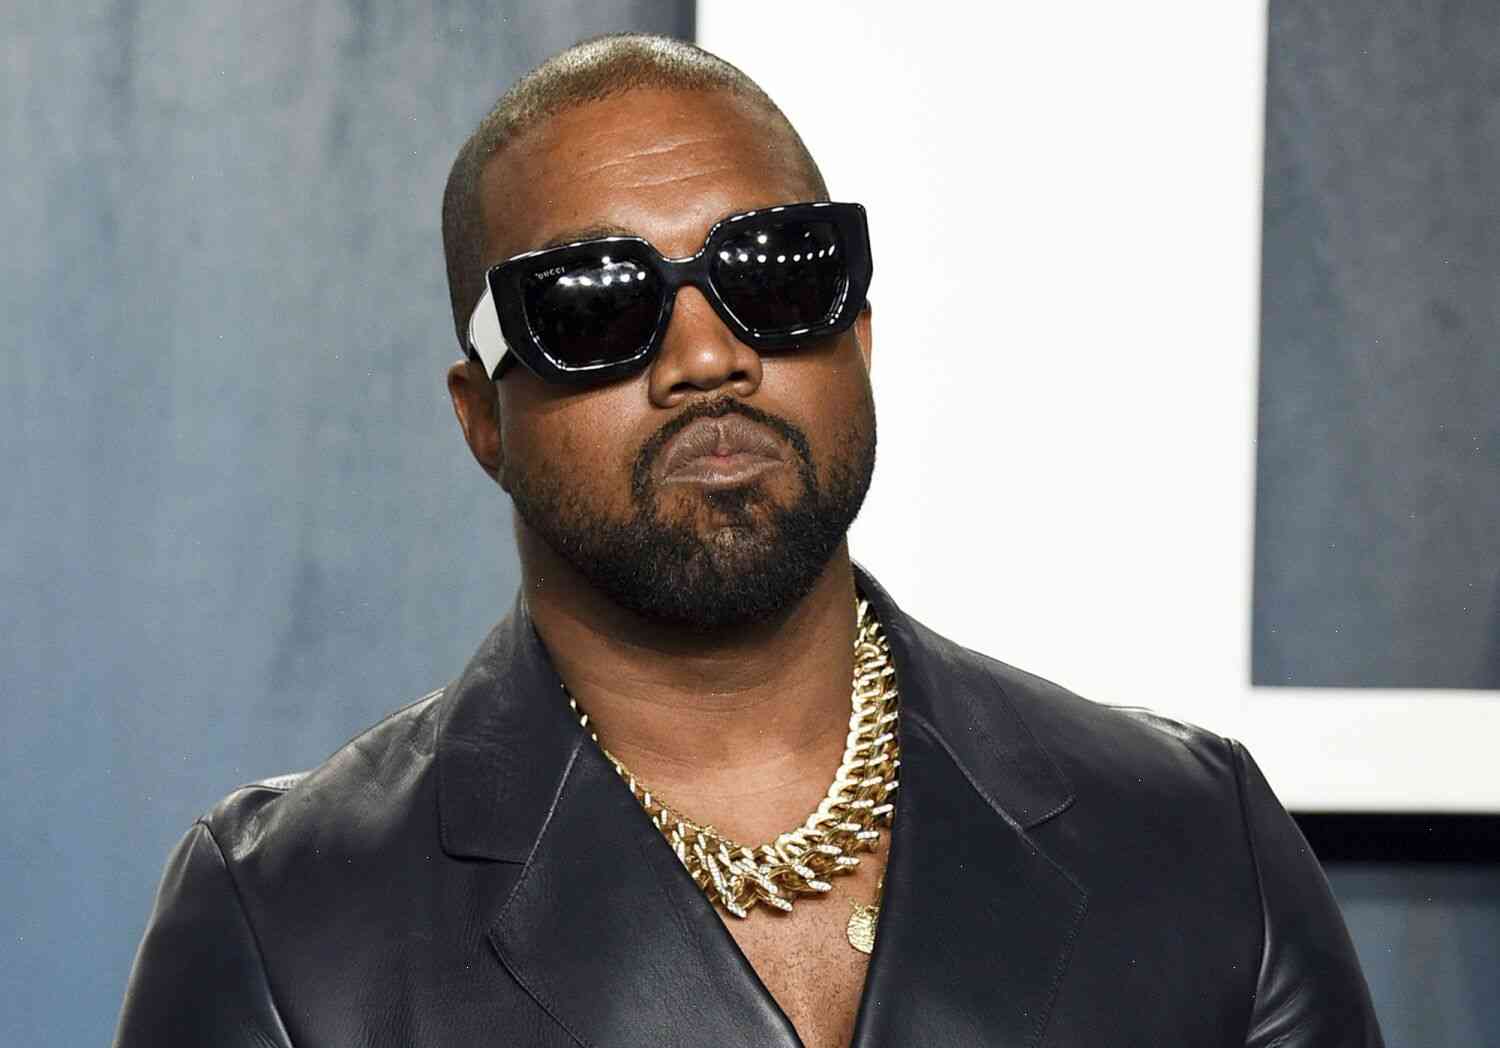 Kanye West’s anti-Semitic comments on Oprah Winfrey’s Oprah Show